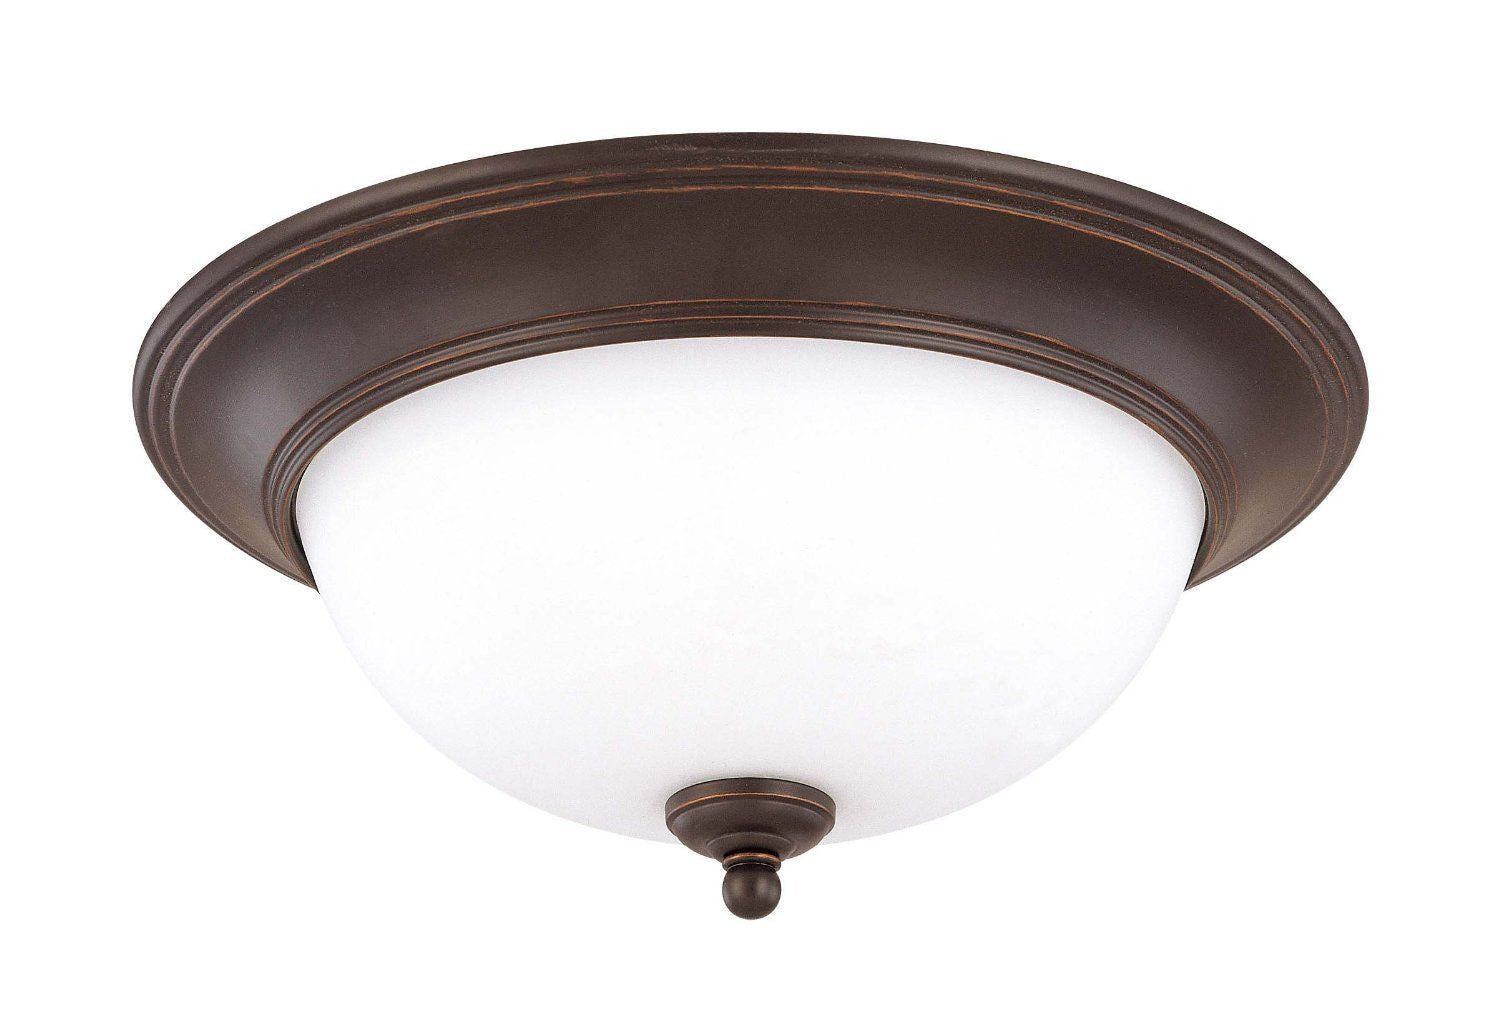 Nuvo Lighting 60-2436 Glenwood Collection Two Light Energy Star Rated GU24 Fluorescent Flush Ceiling Mount in Sudbury Bronze Finish